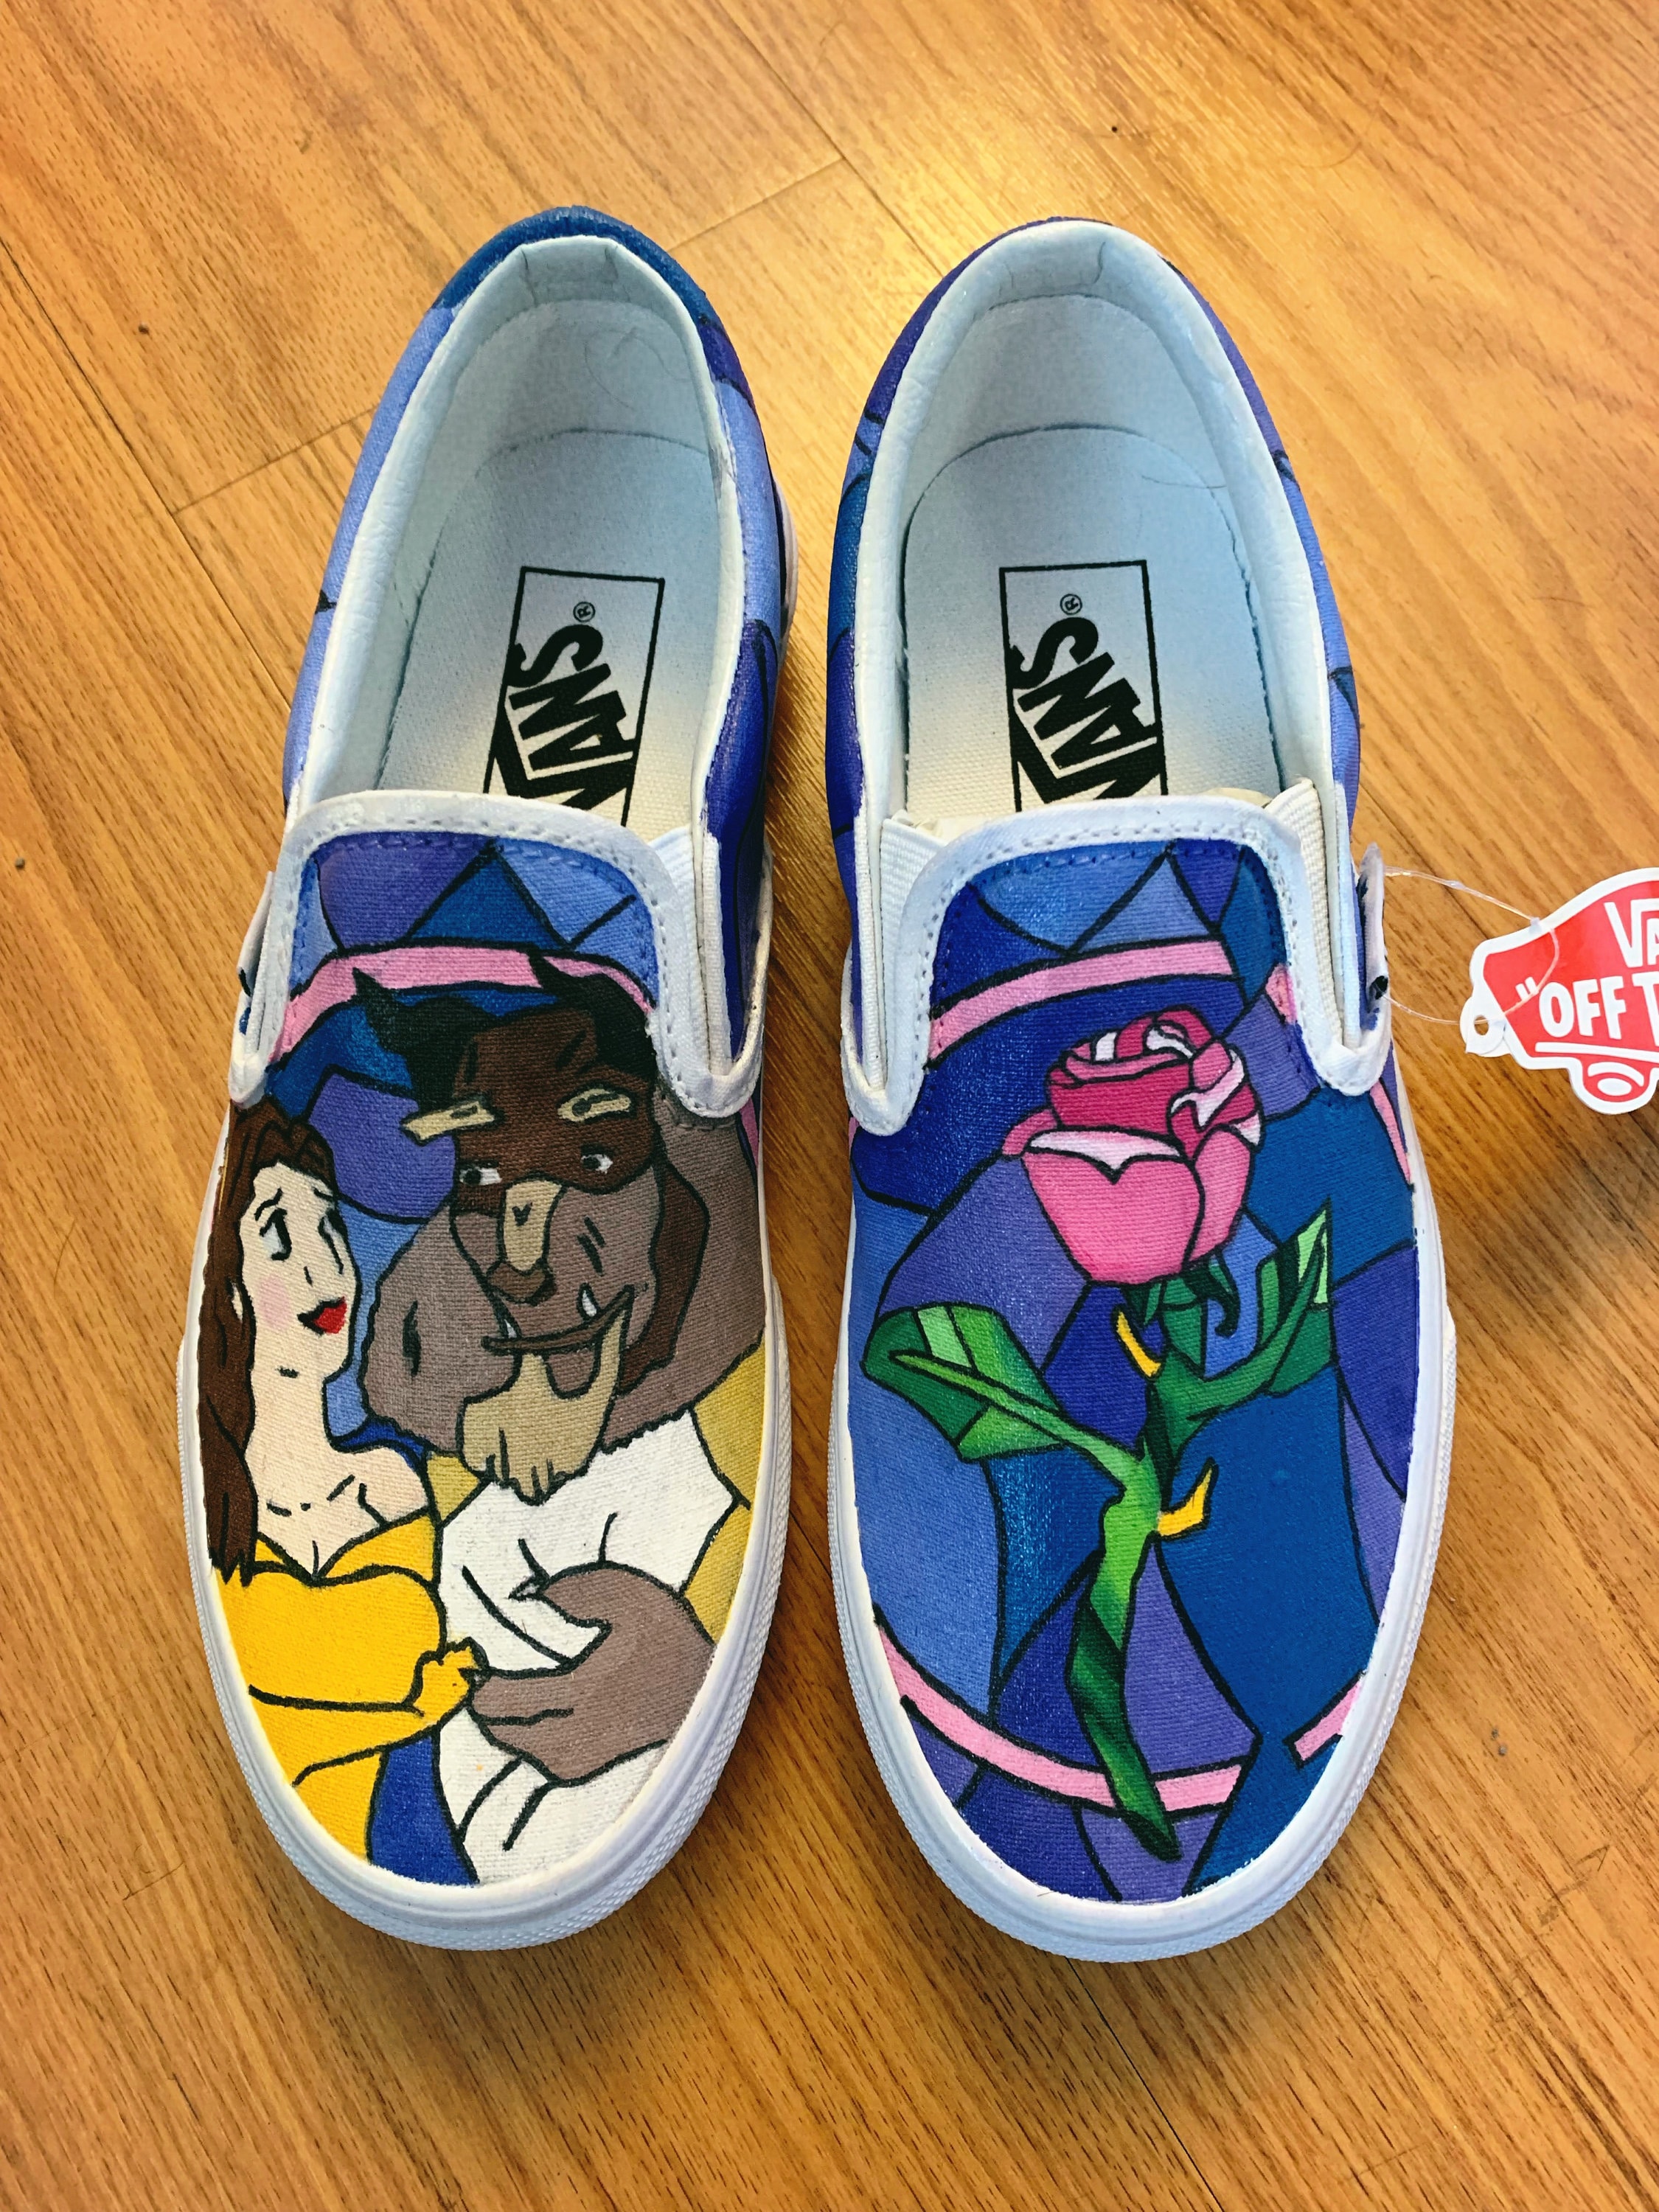 Belle and the Beast Vans | Etsy